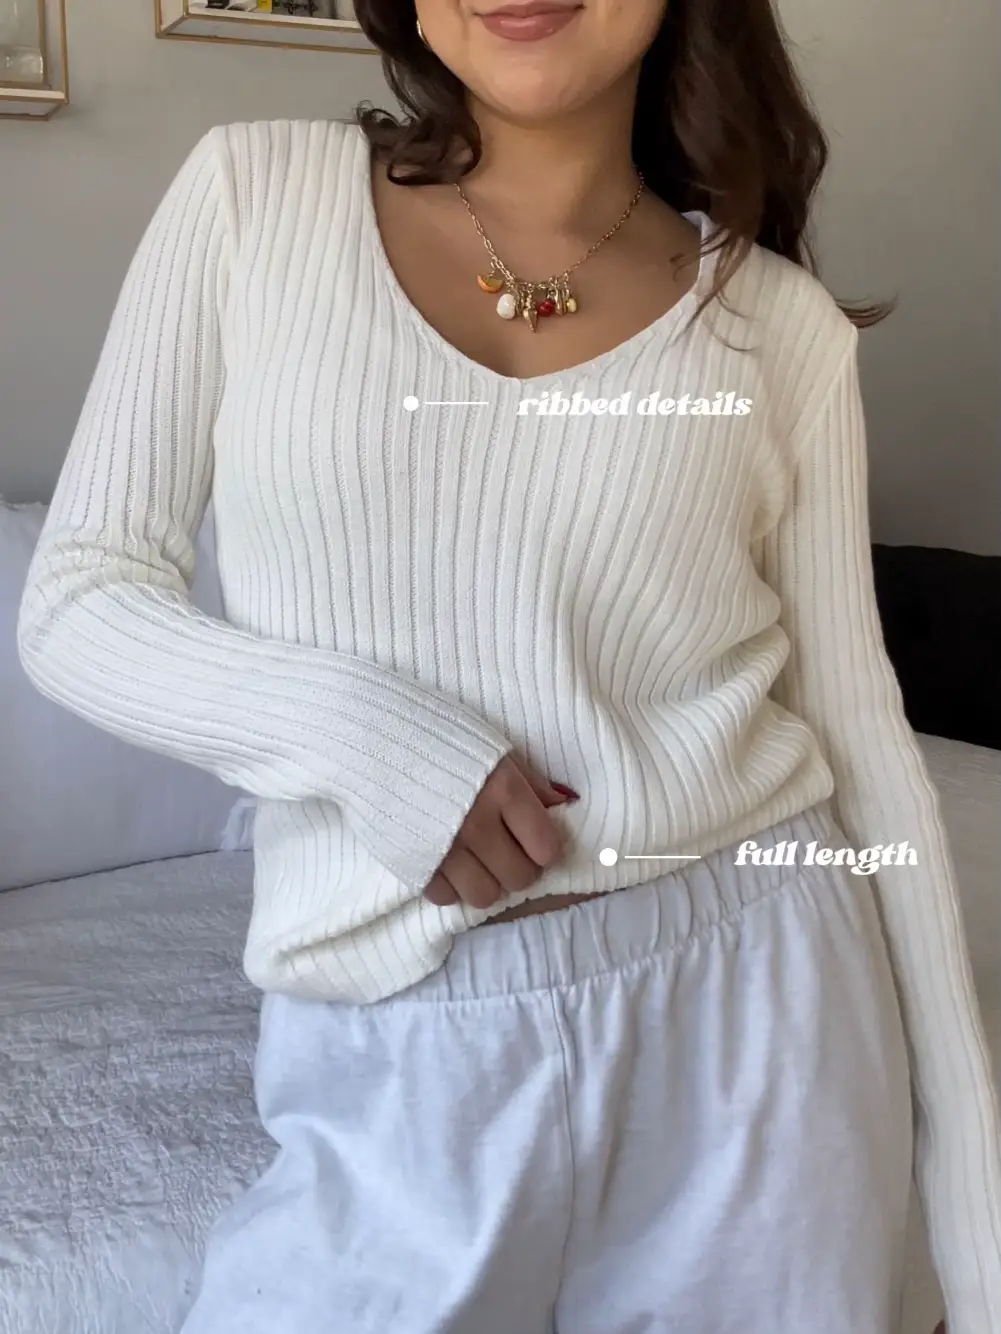 BRANDY MELVILLE SWEATERS HAUL | Gallery posted by riannagail | Lemon8